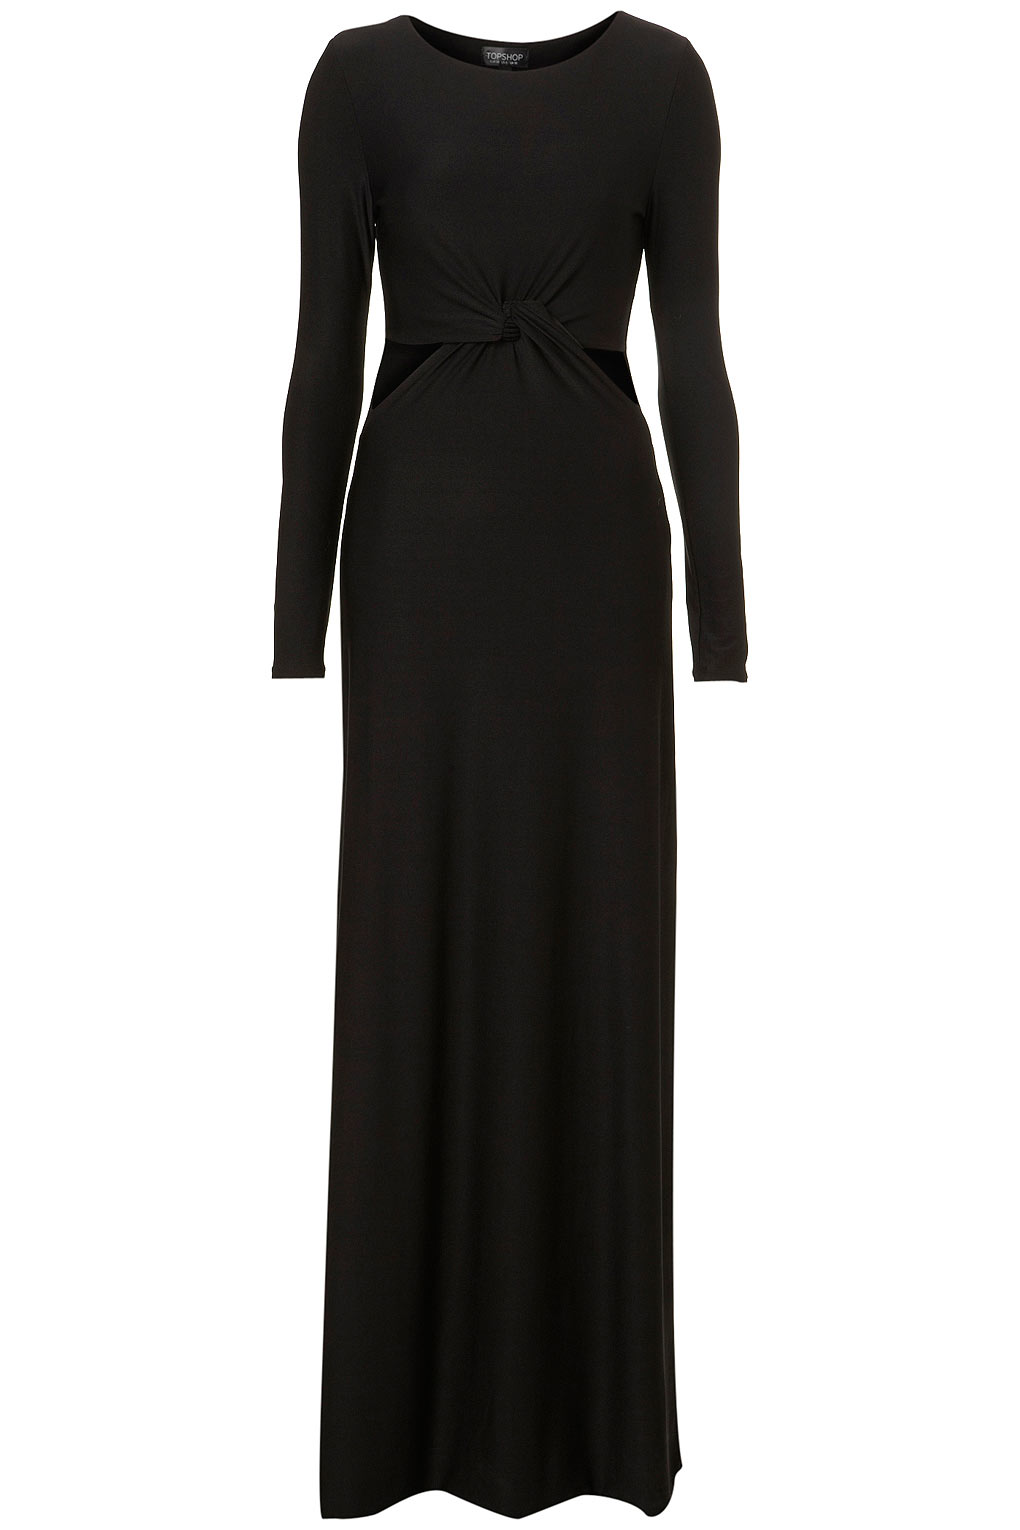 Topshop Twist Front Cut Out Maxi Dress in Black | Lyst